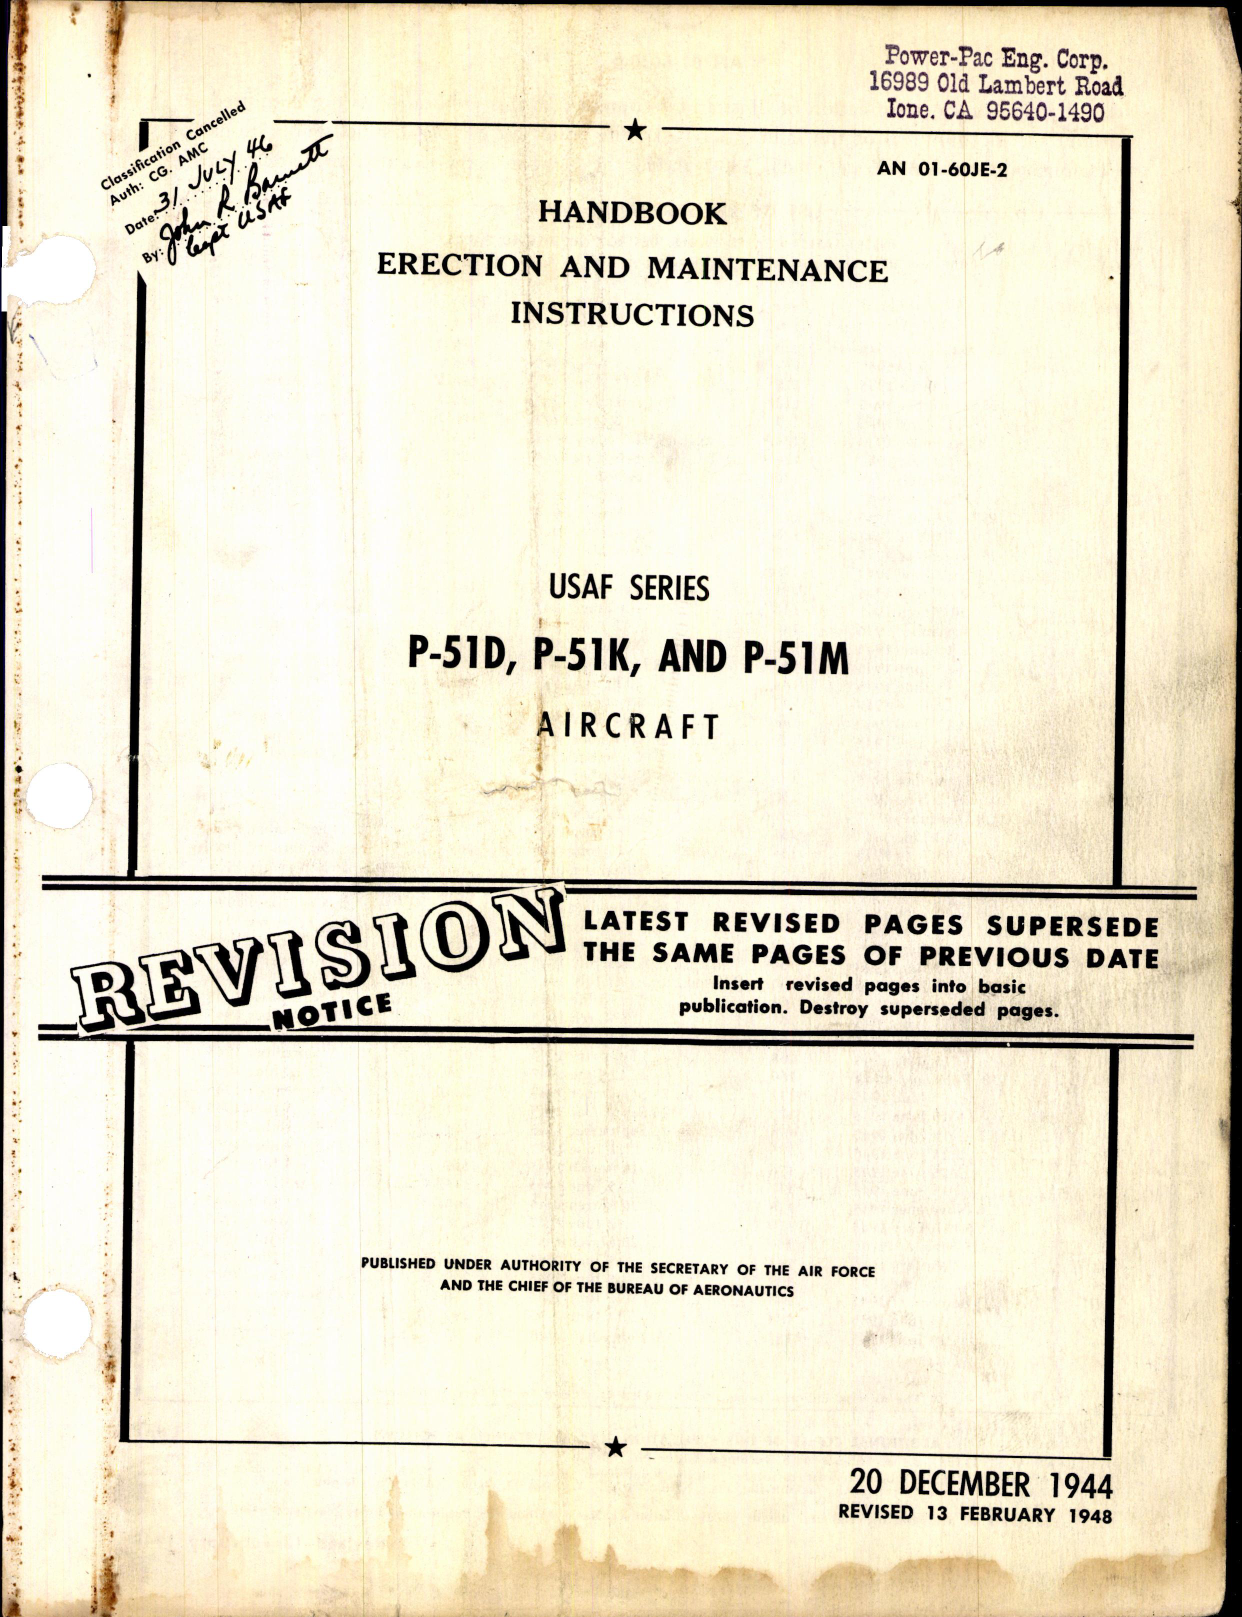 Sample page 1 from AirCorps Library document: Erection and Maintenance Instructions for P-51D, P-51K, and P-51M